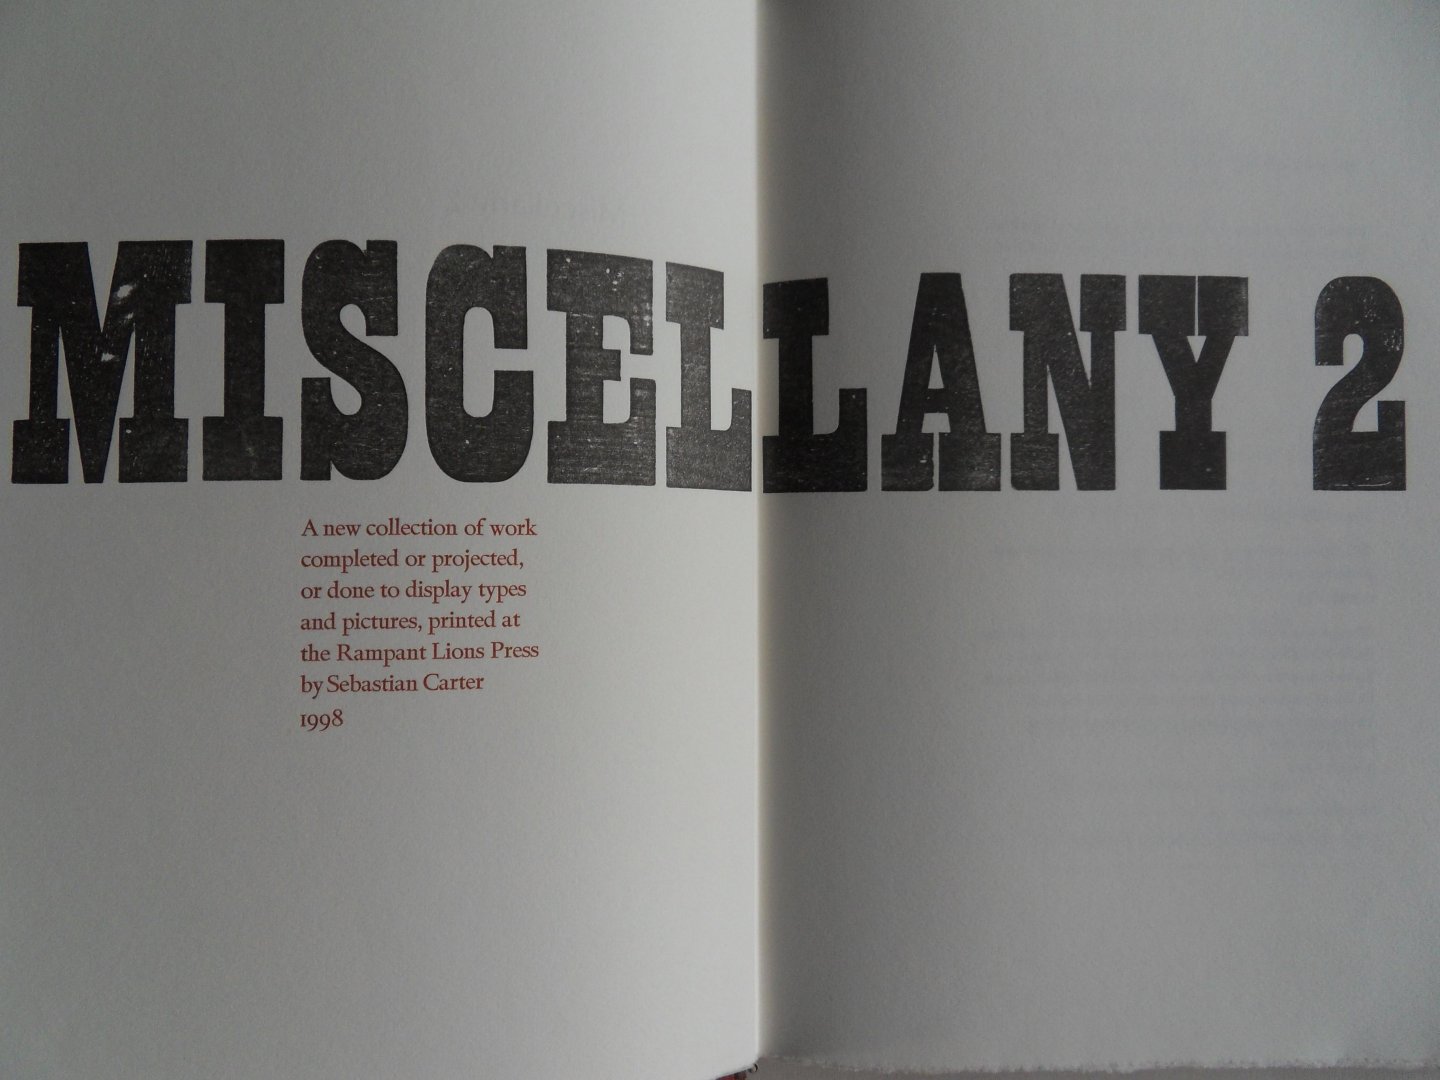 (Rampant Lions Press). Carter, Sebastian. - Miscellany 2. - A new collection of work completed or projected, or done to display types and pictures, printed at the Rampant Lions Press by Sebastian Carter. [ Genummerd exemplaar 54 / 225 ].